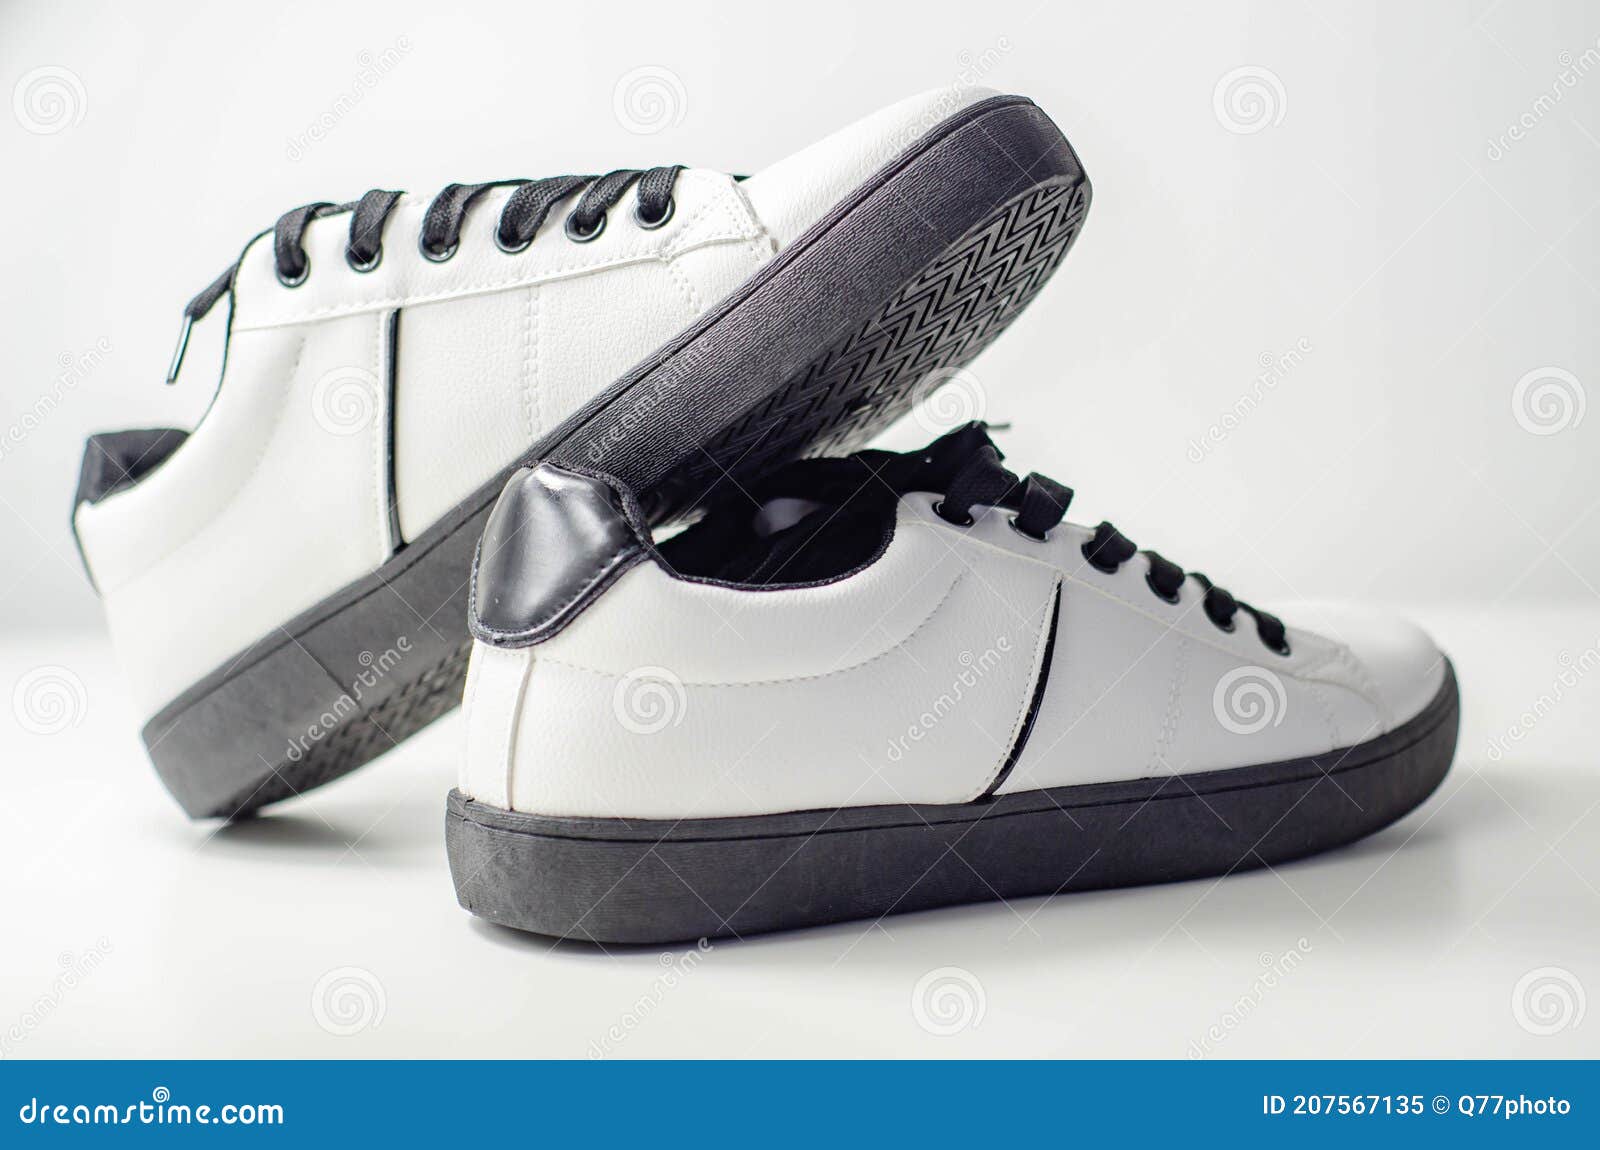 White Sneakers with Black Laces, Classic Sports Shoes Stock Image ...